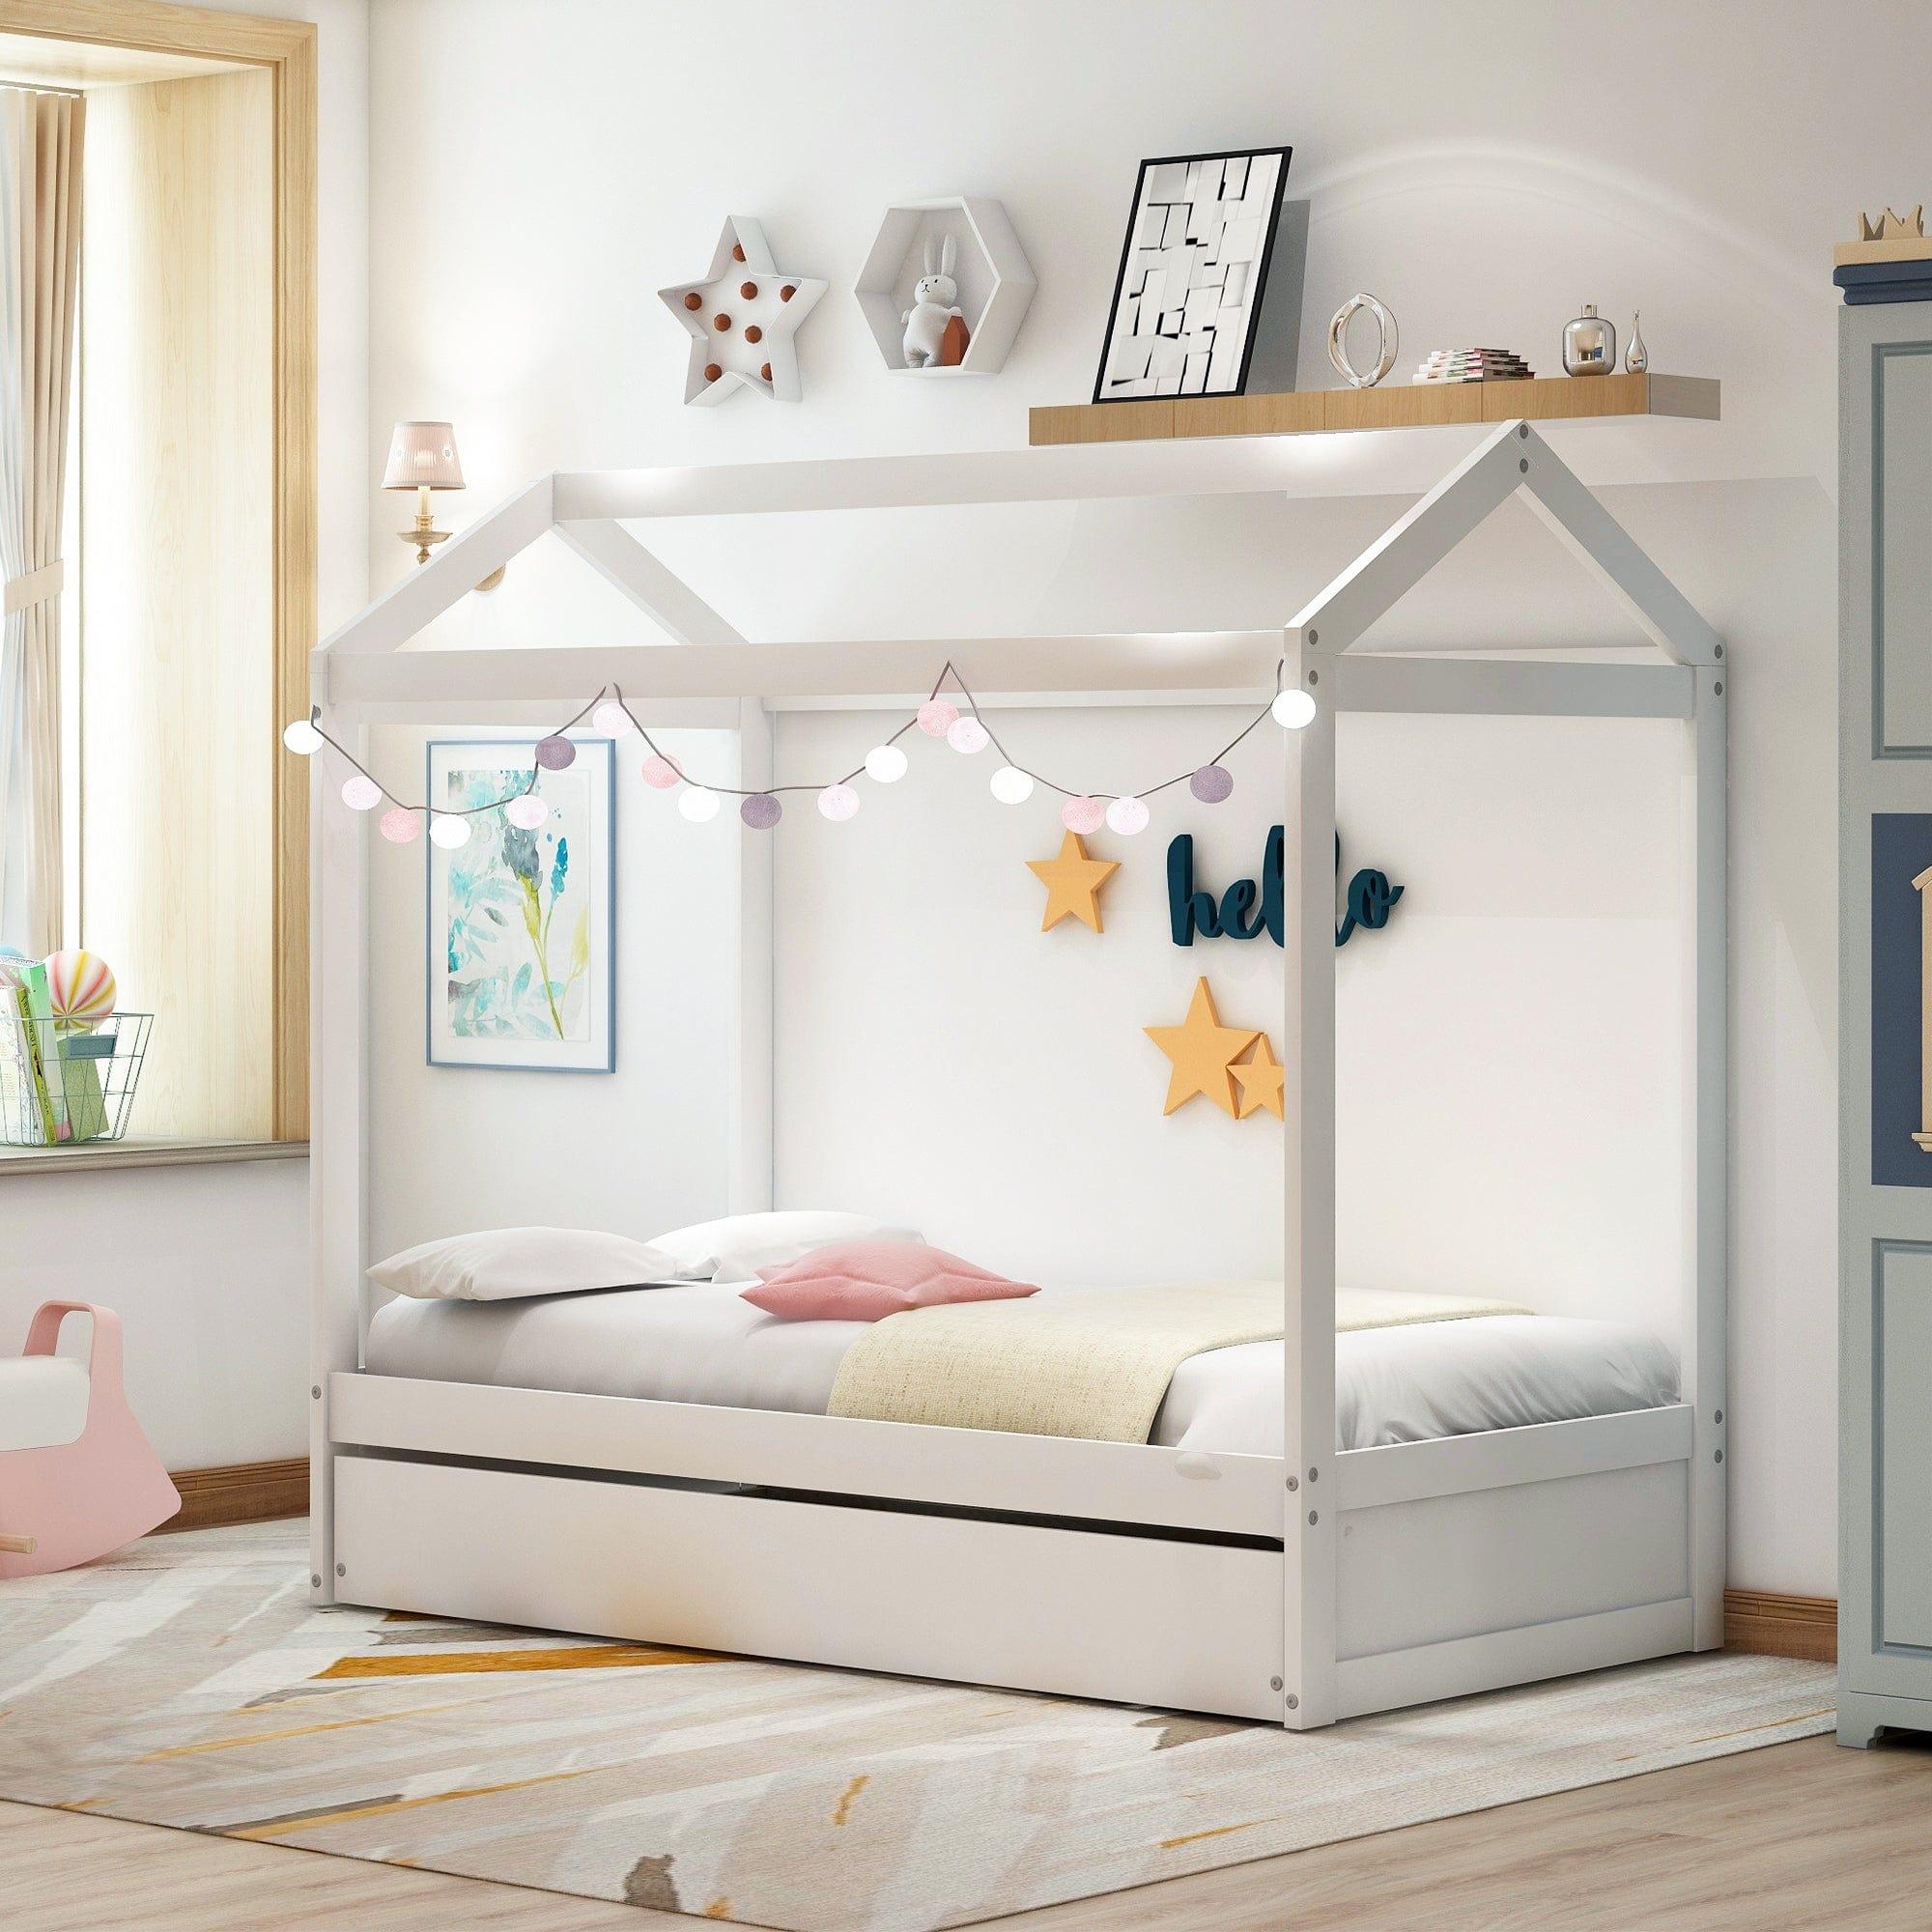 Shop House Bed with Trundle, can be Decorated,White(Old SKU:SM000103AAK) Mademoiselle Home Decor